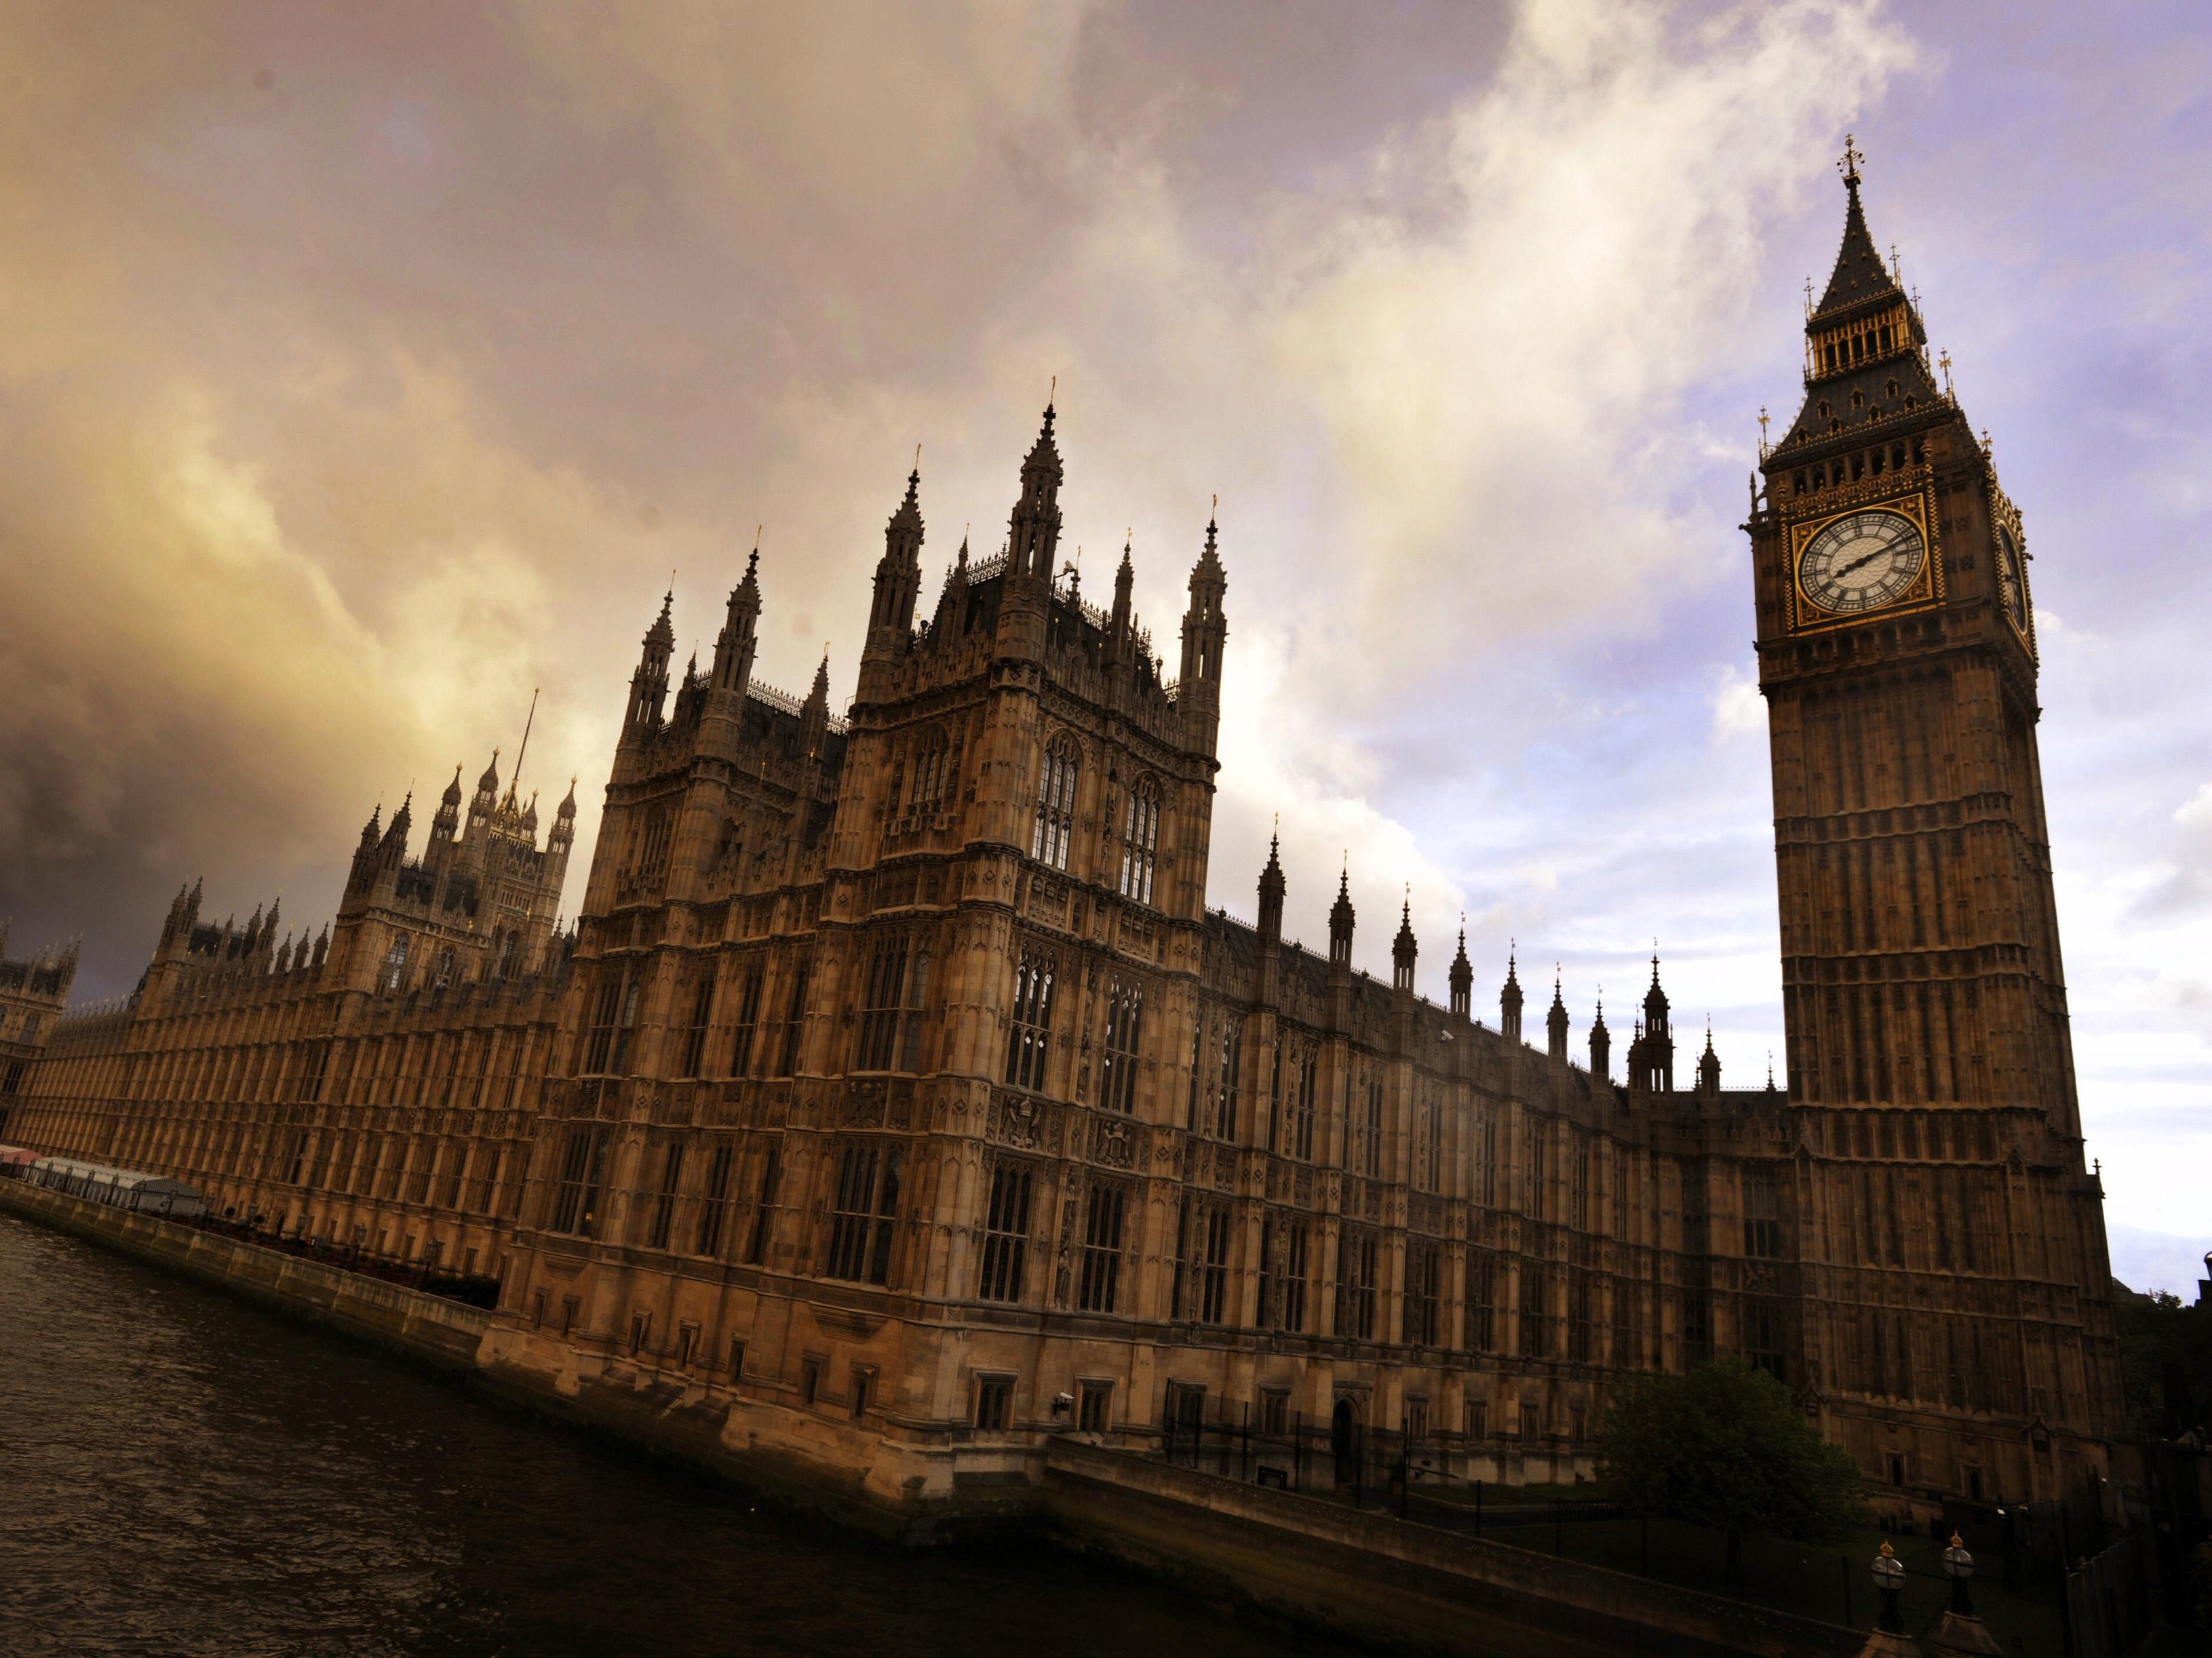 APPGs, unlike select committees, have no formal constitutional role